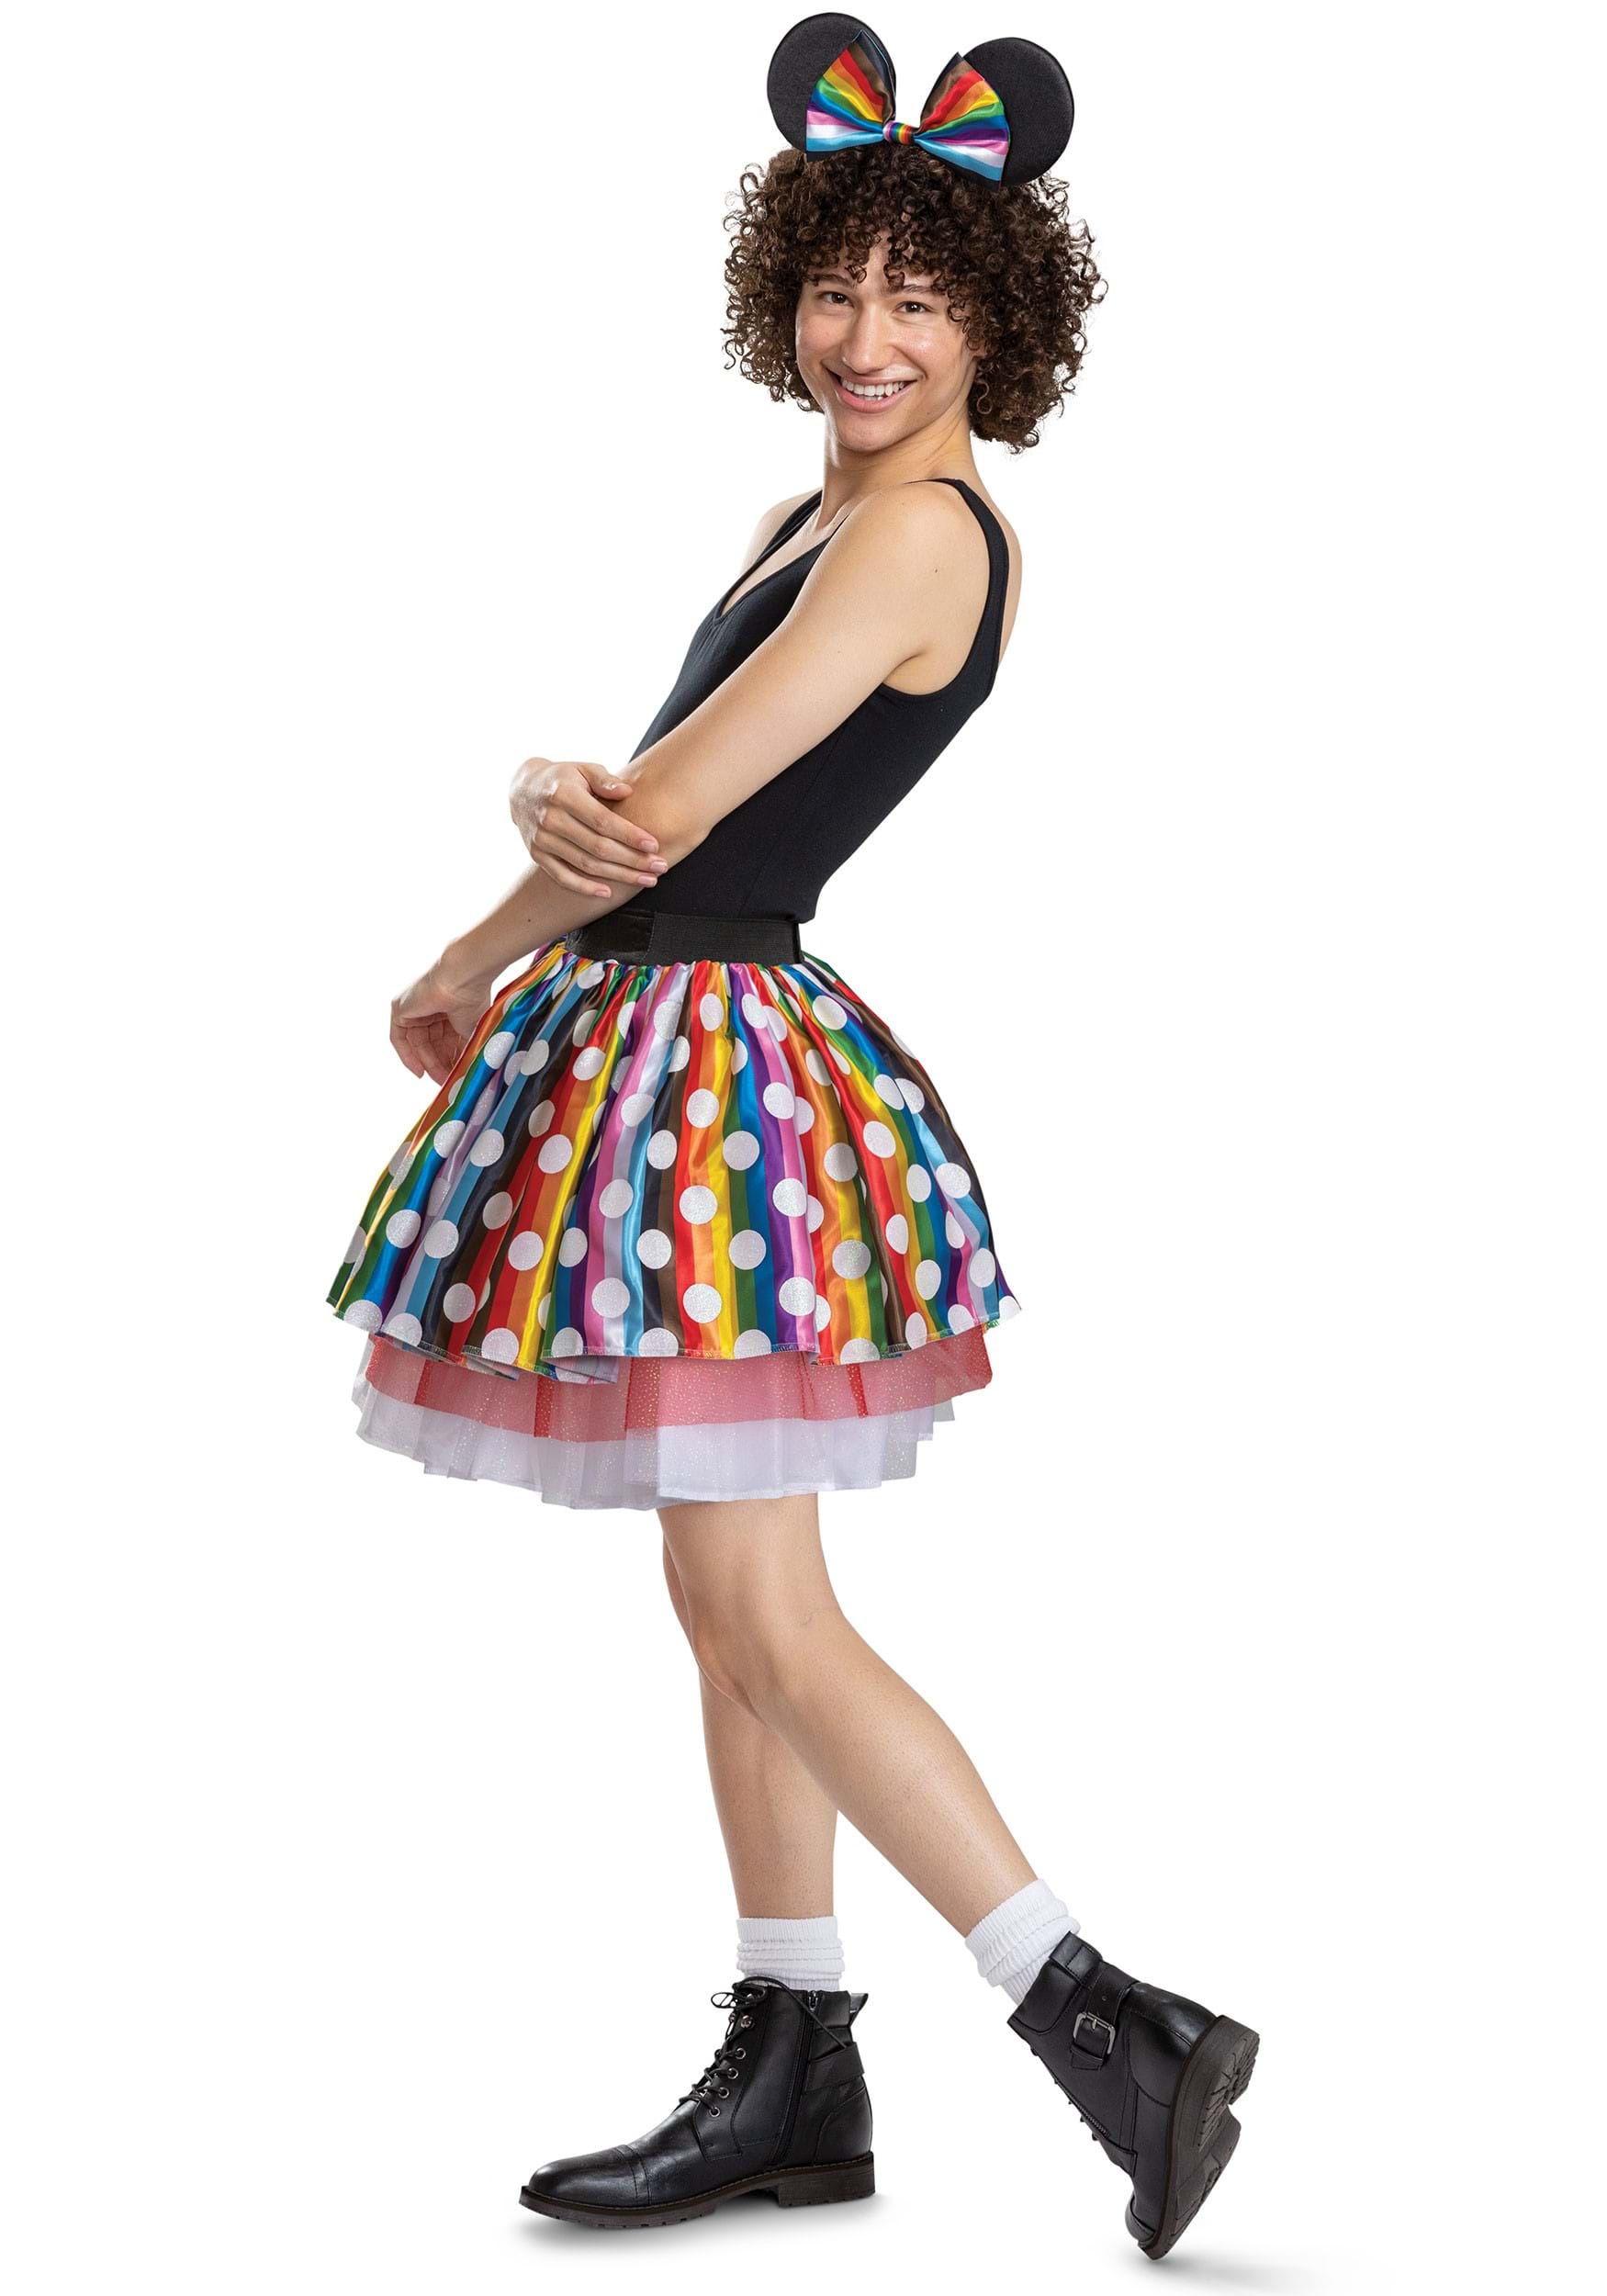 Disney Pride Minnie Mouse Costume Dress For Women